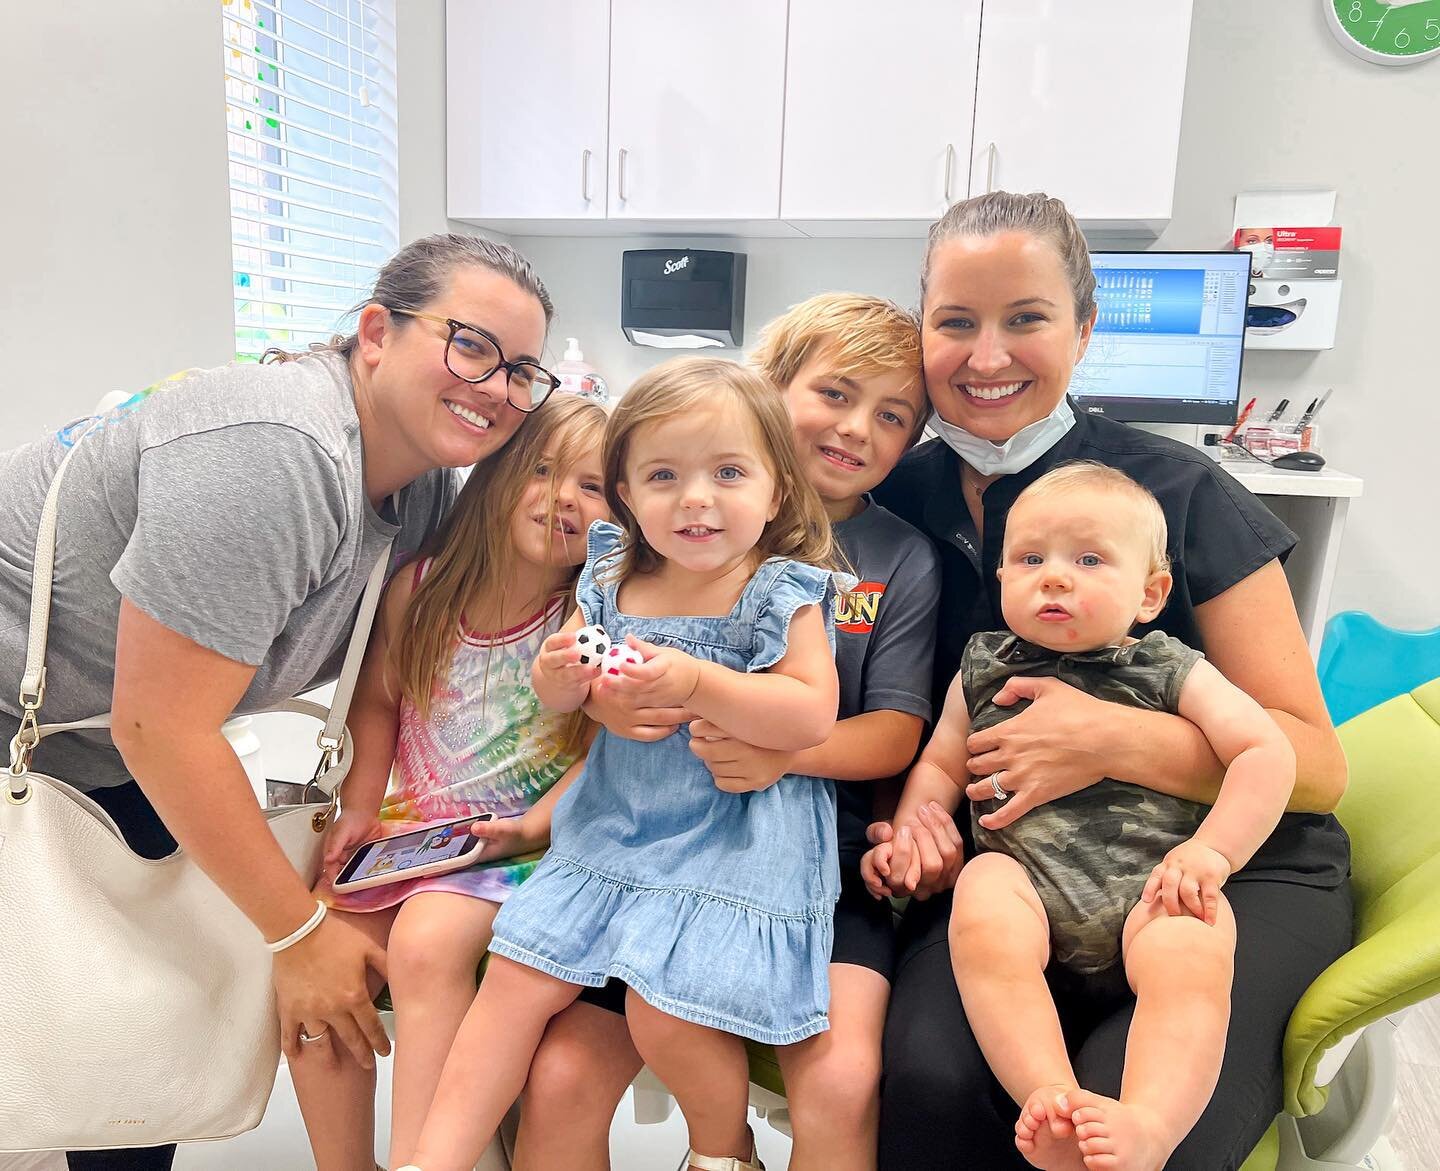 Special visit from baby Grant and cousins!  #nutleypediatricdentistry #npd #hollywoodsmiles #hollywoodstars